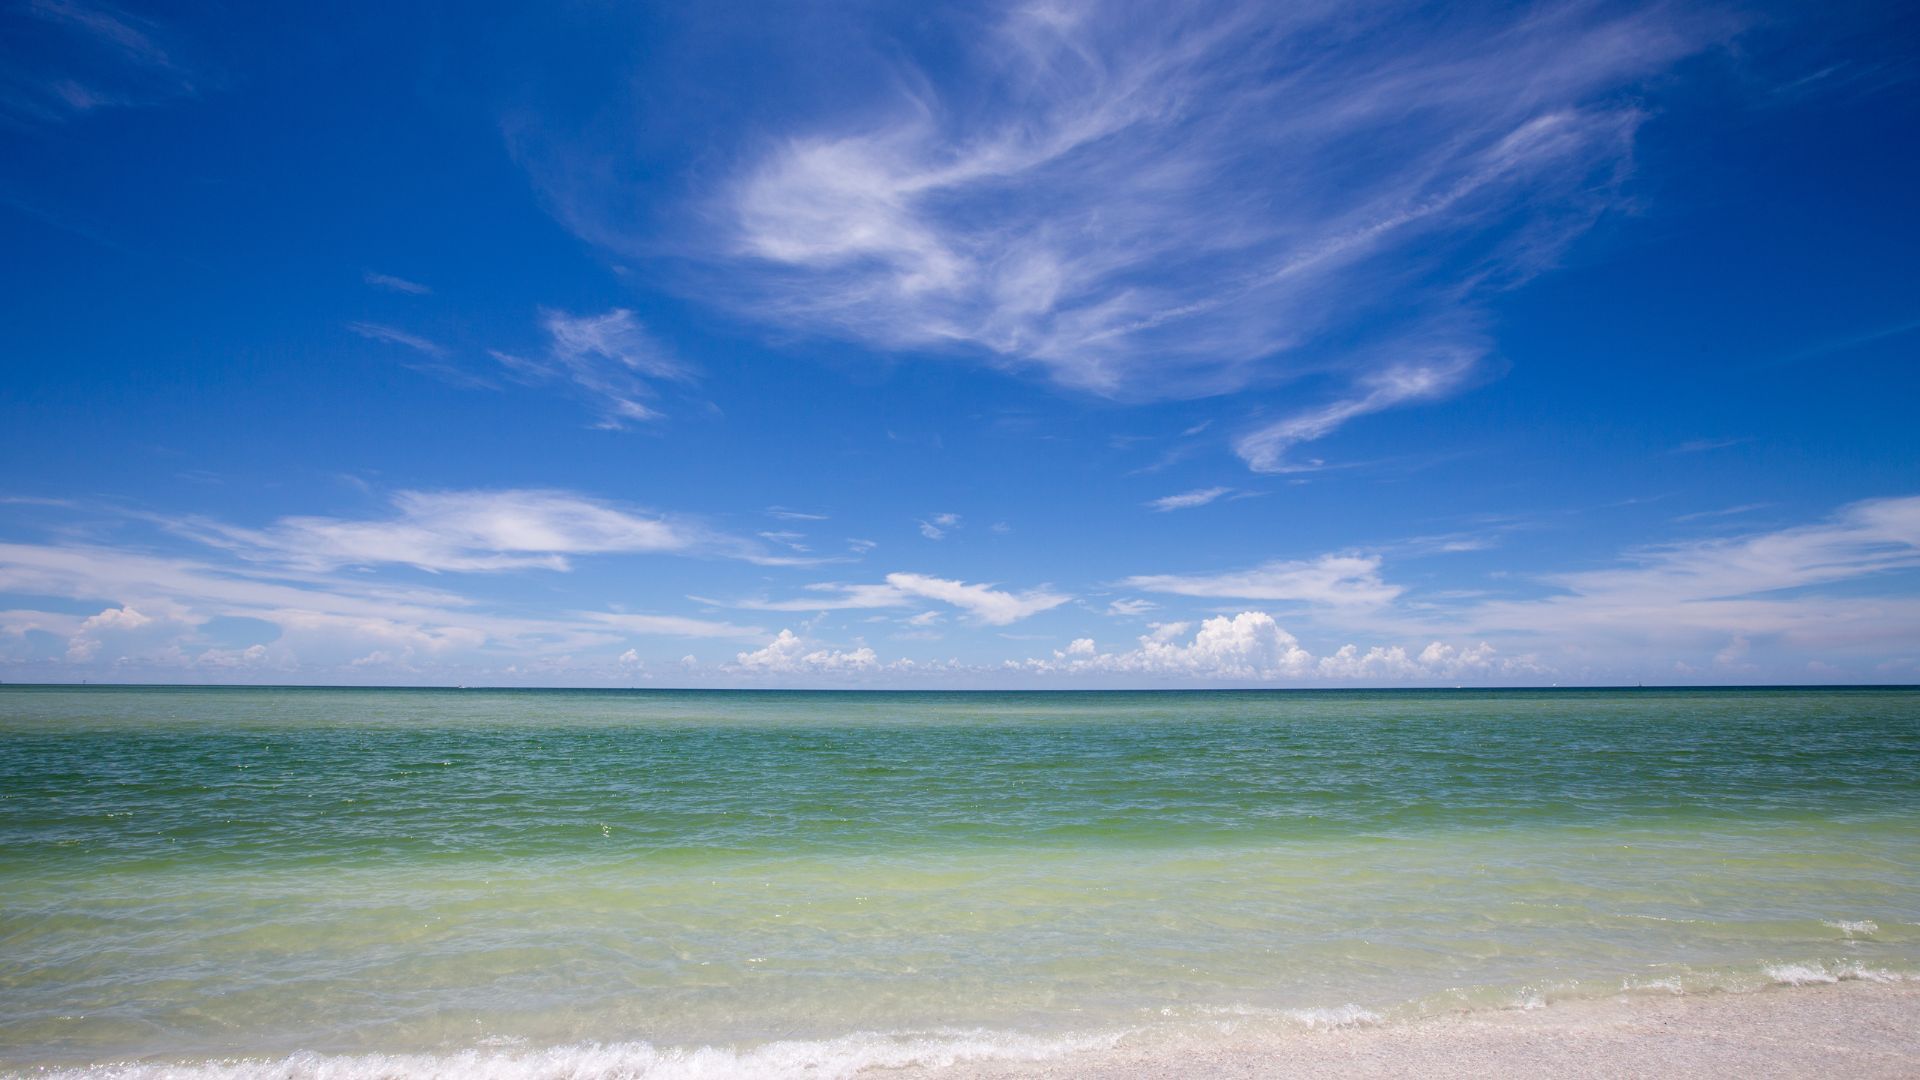 <p>                     Live between Naples and Marco Island? Then head to Keewaydin Island to have a wander on one of the only pet-friendly beaches in the vicinity. With just under 8 miles of pristine white sand, you and your pooch can bask in the sun, frolic in the sea and become acquainted with new surroundings.                   </p>